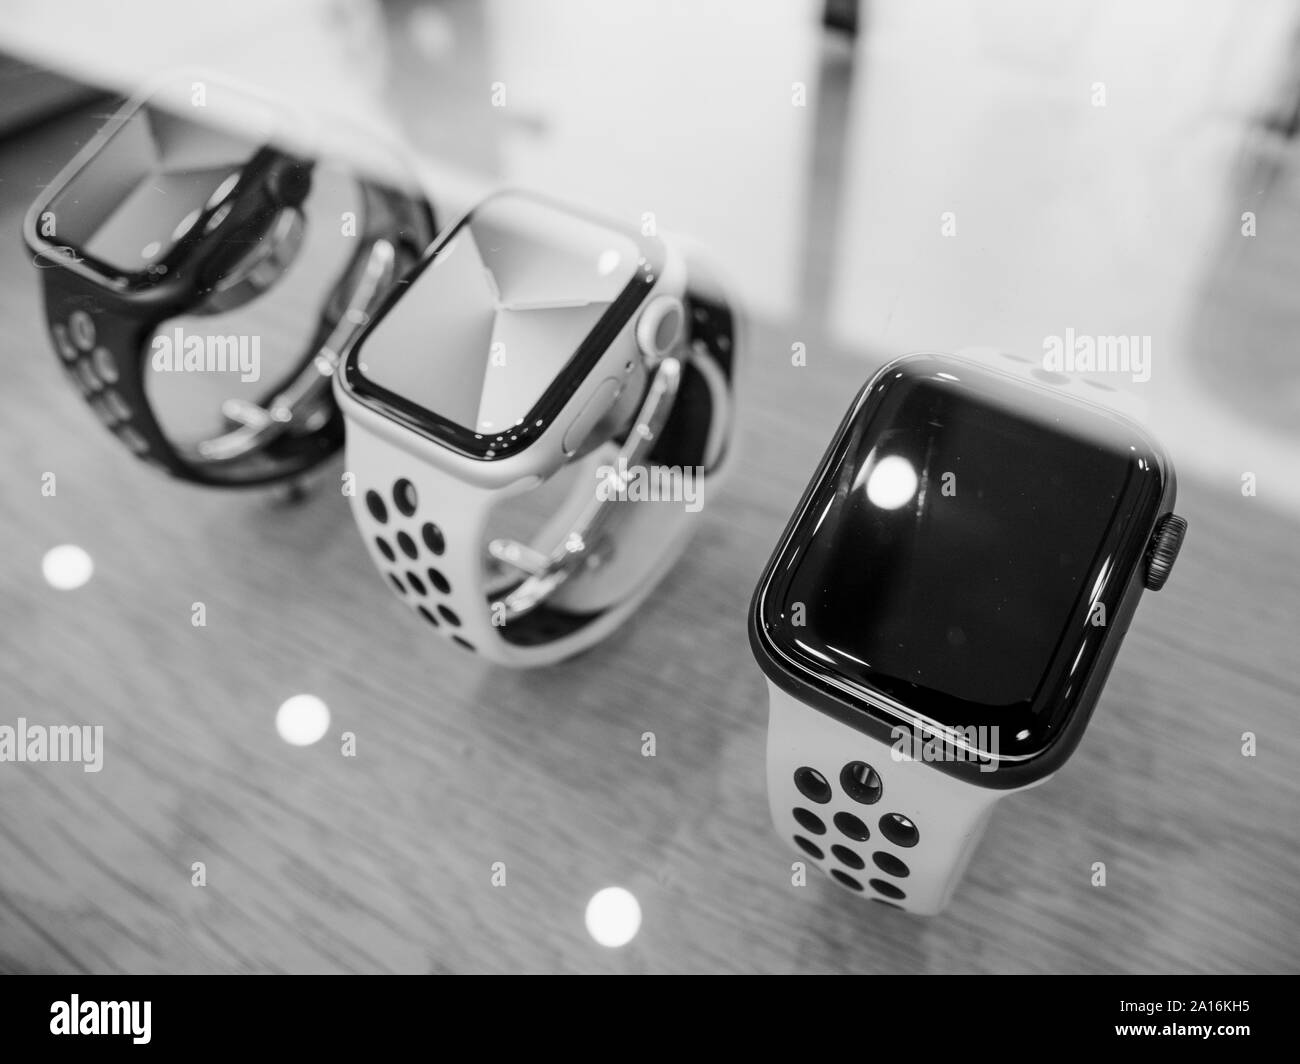 Apple Nike Watch High Resolution Stock Photography and Images - Alamy